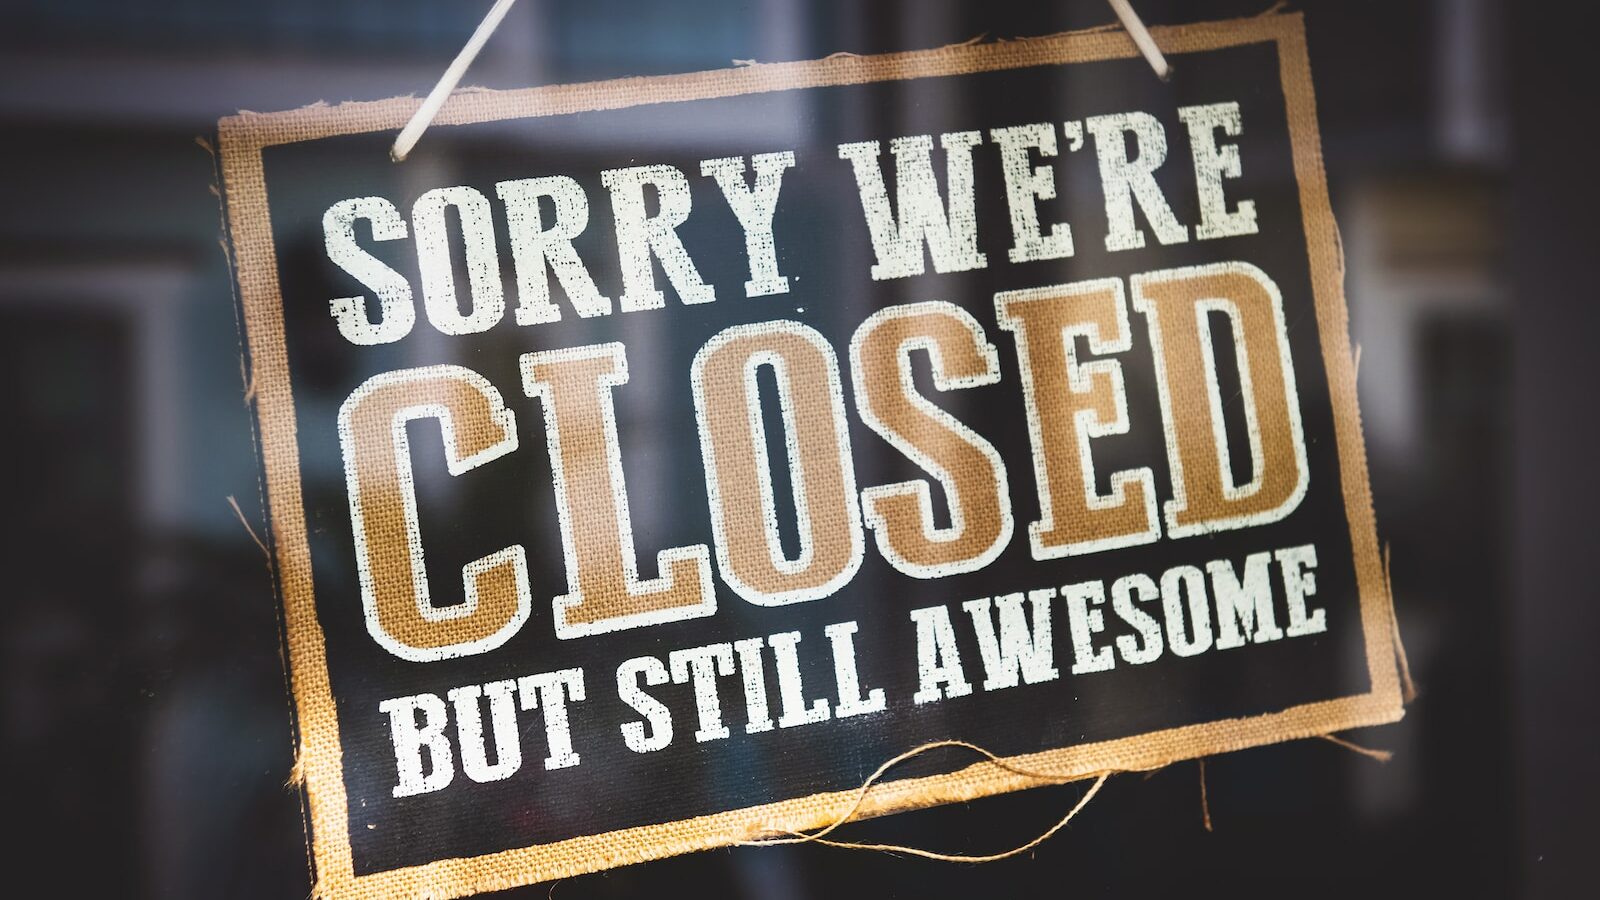 Sorry We're closed